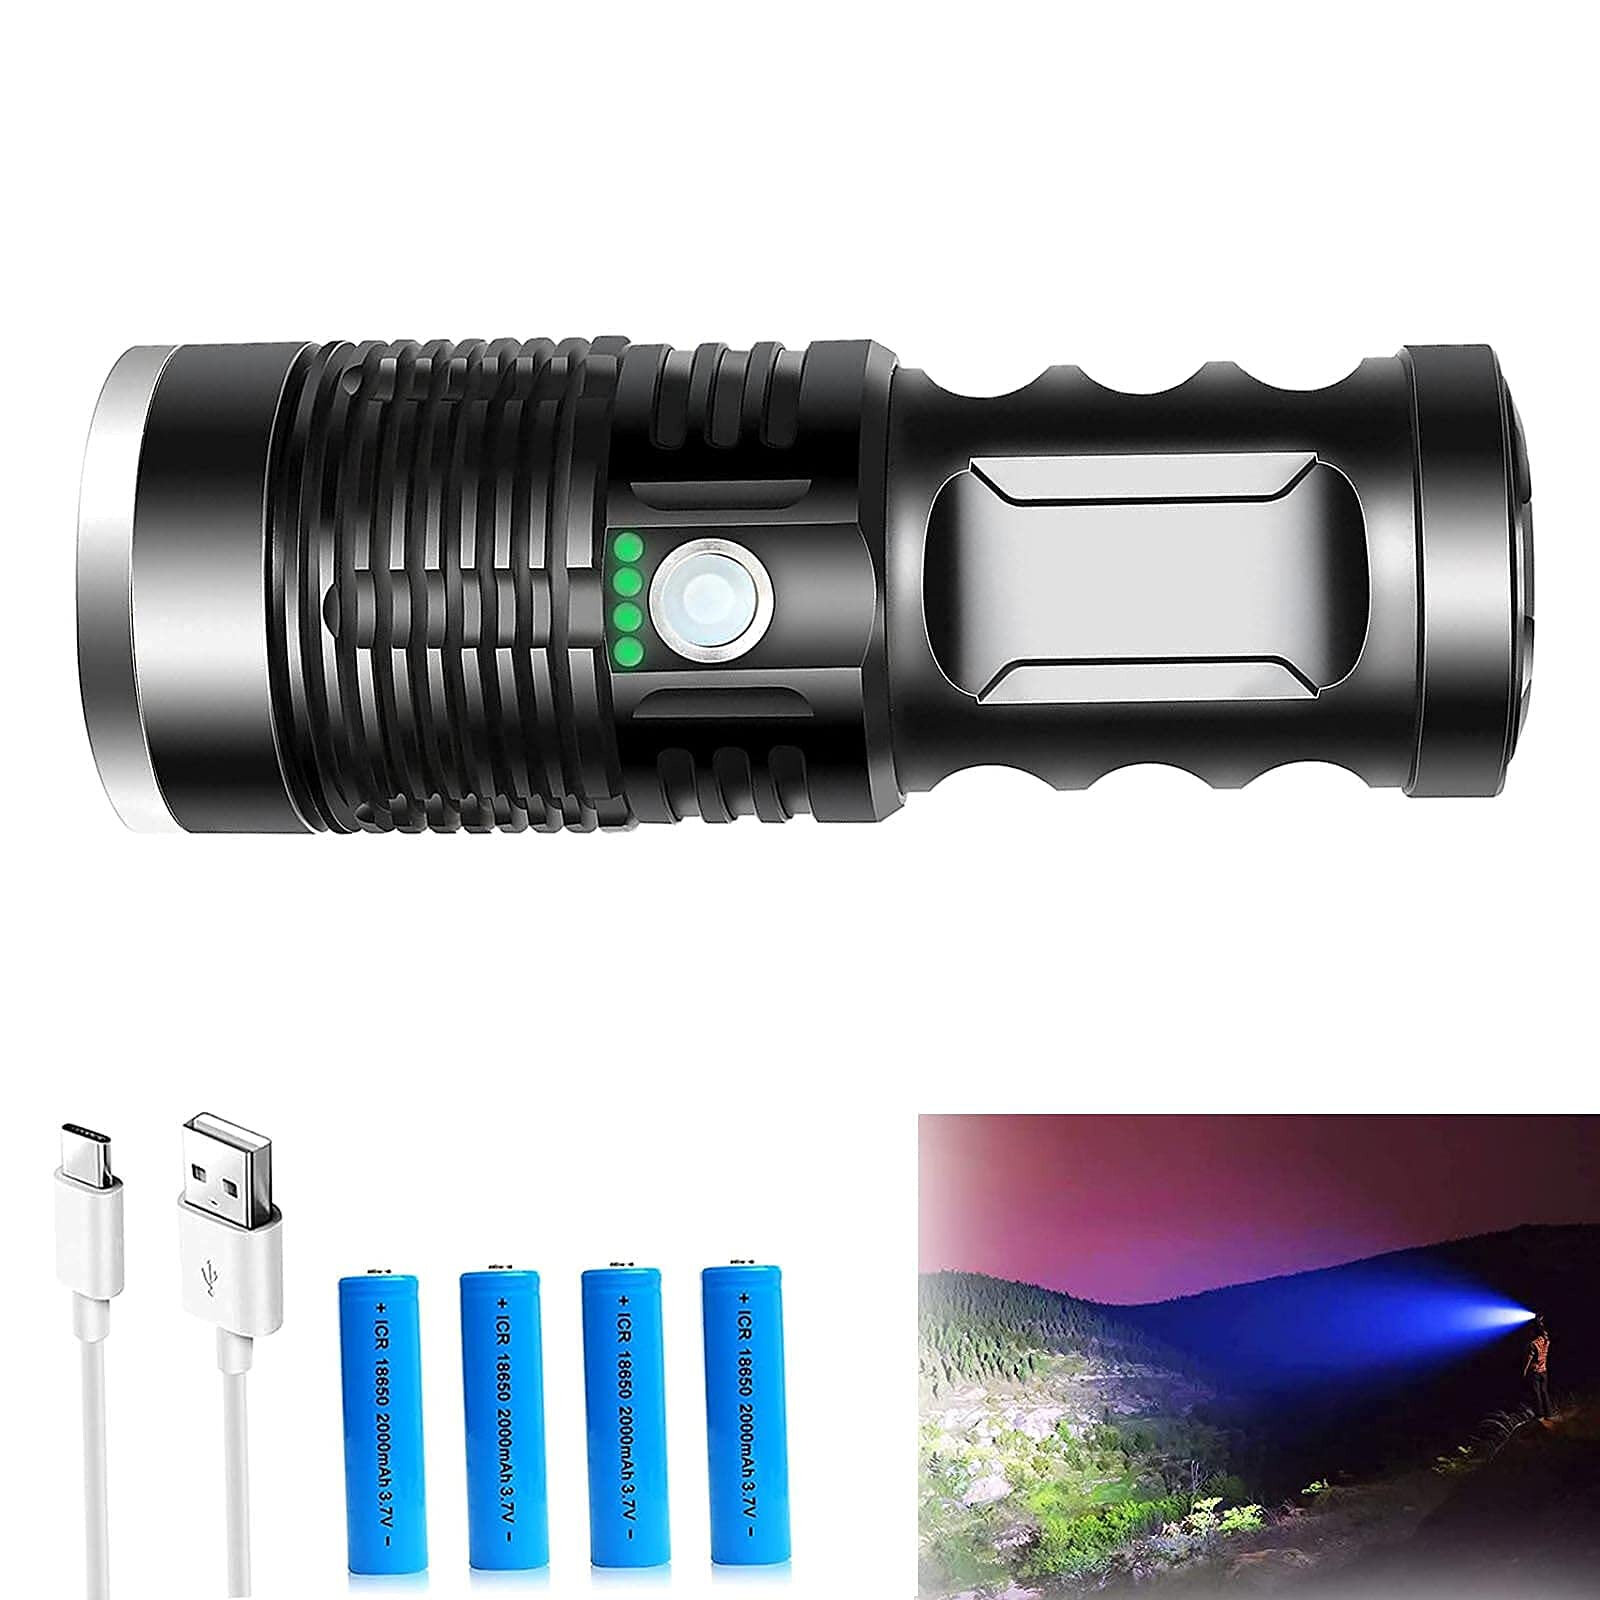 Lot 90000 Lumens Zoomable T6 LED Flashlight Torch Tactical Light Lamp Aluminum